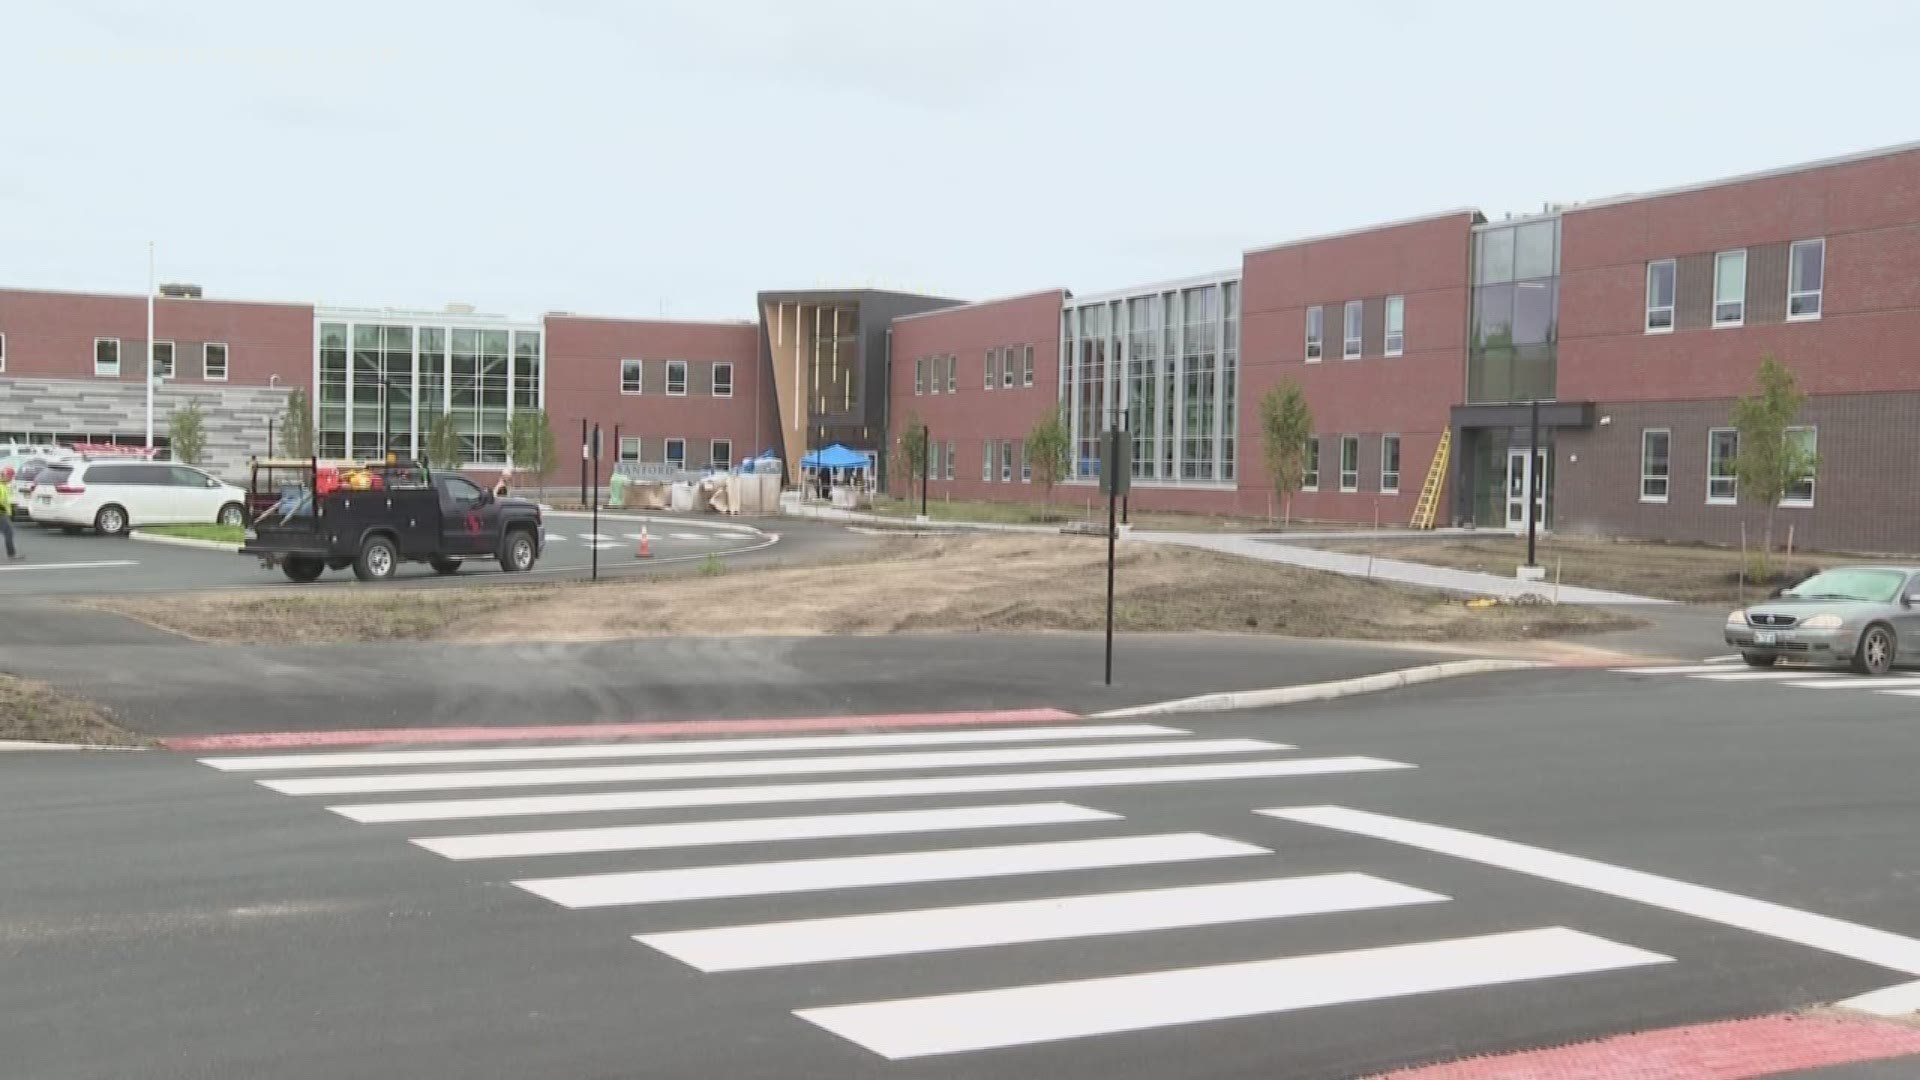 First day of class in the new 100 million dollar Sanford High school is scheduled for Tuesday, and last minute preps are underway.